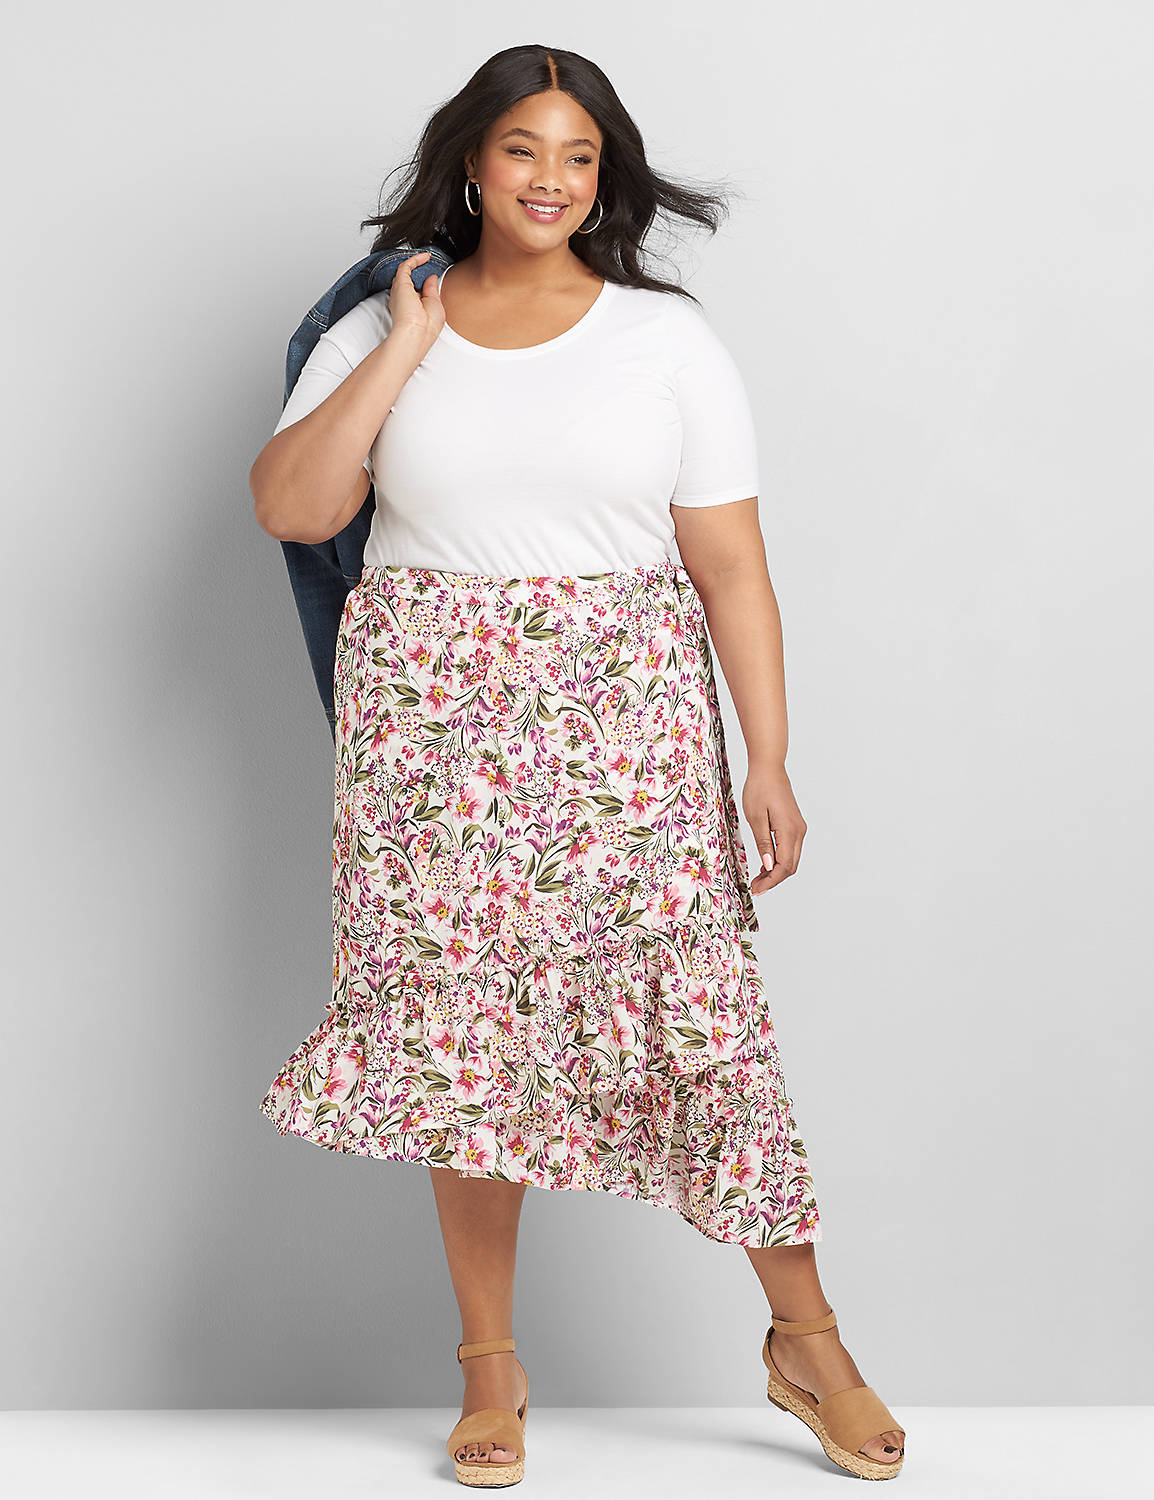 1119174 MIDI WRAP SKIRT W/TIE 1119174:LBSP21257_EvelynFloral_C1:18/20 Product Image 1